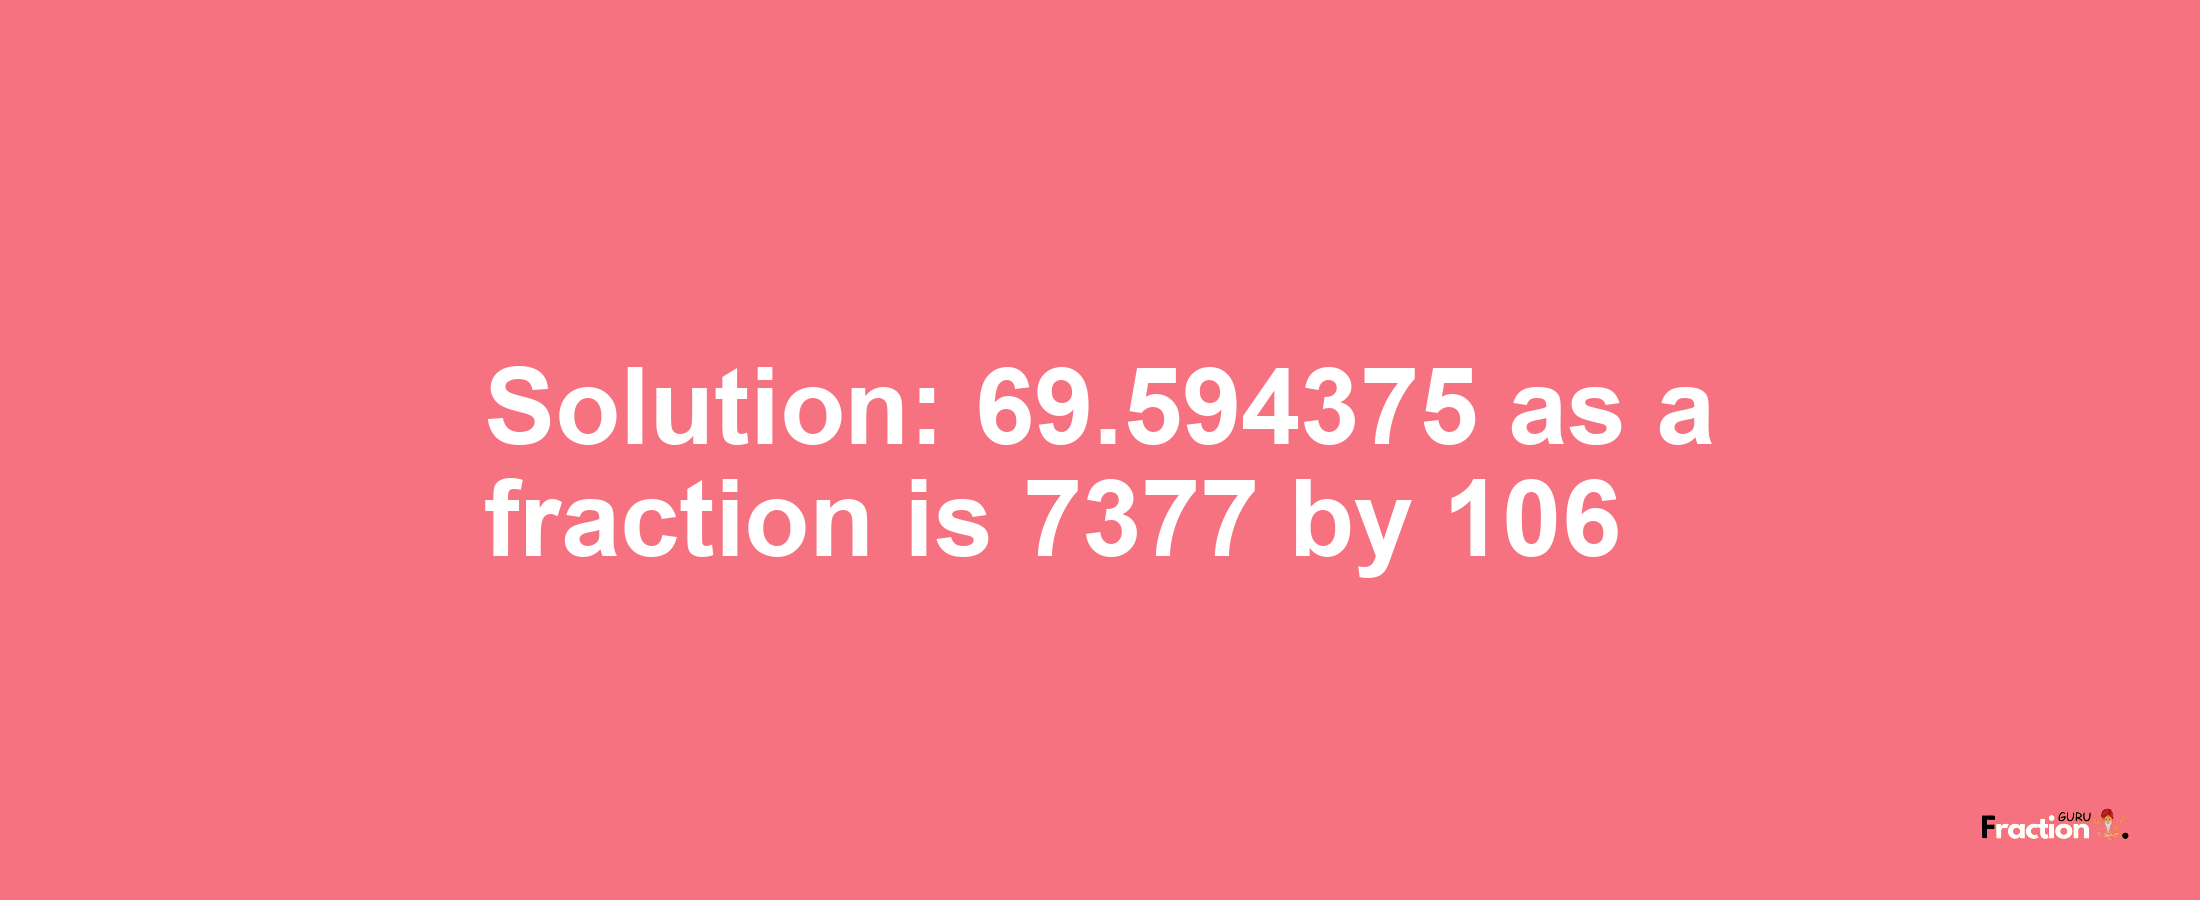 Solution:69.594375 as a fraction is 7377/106